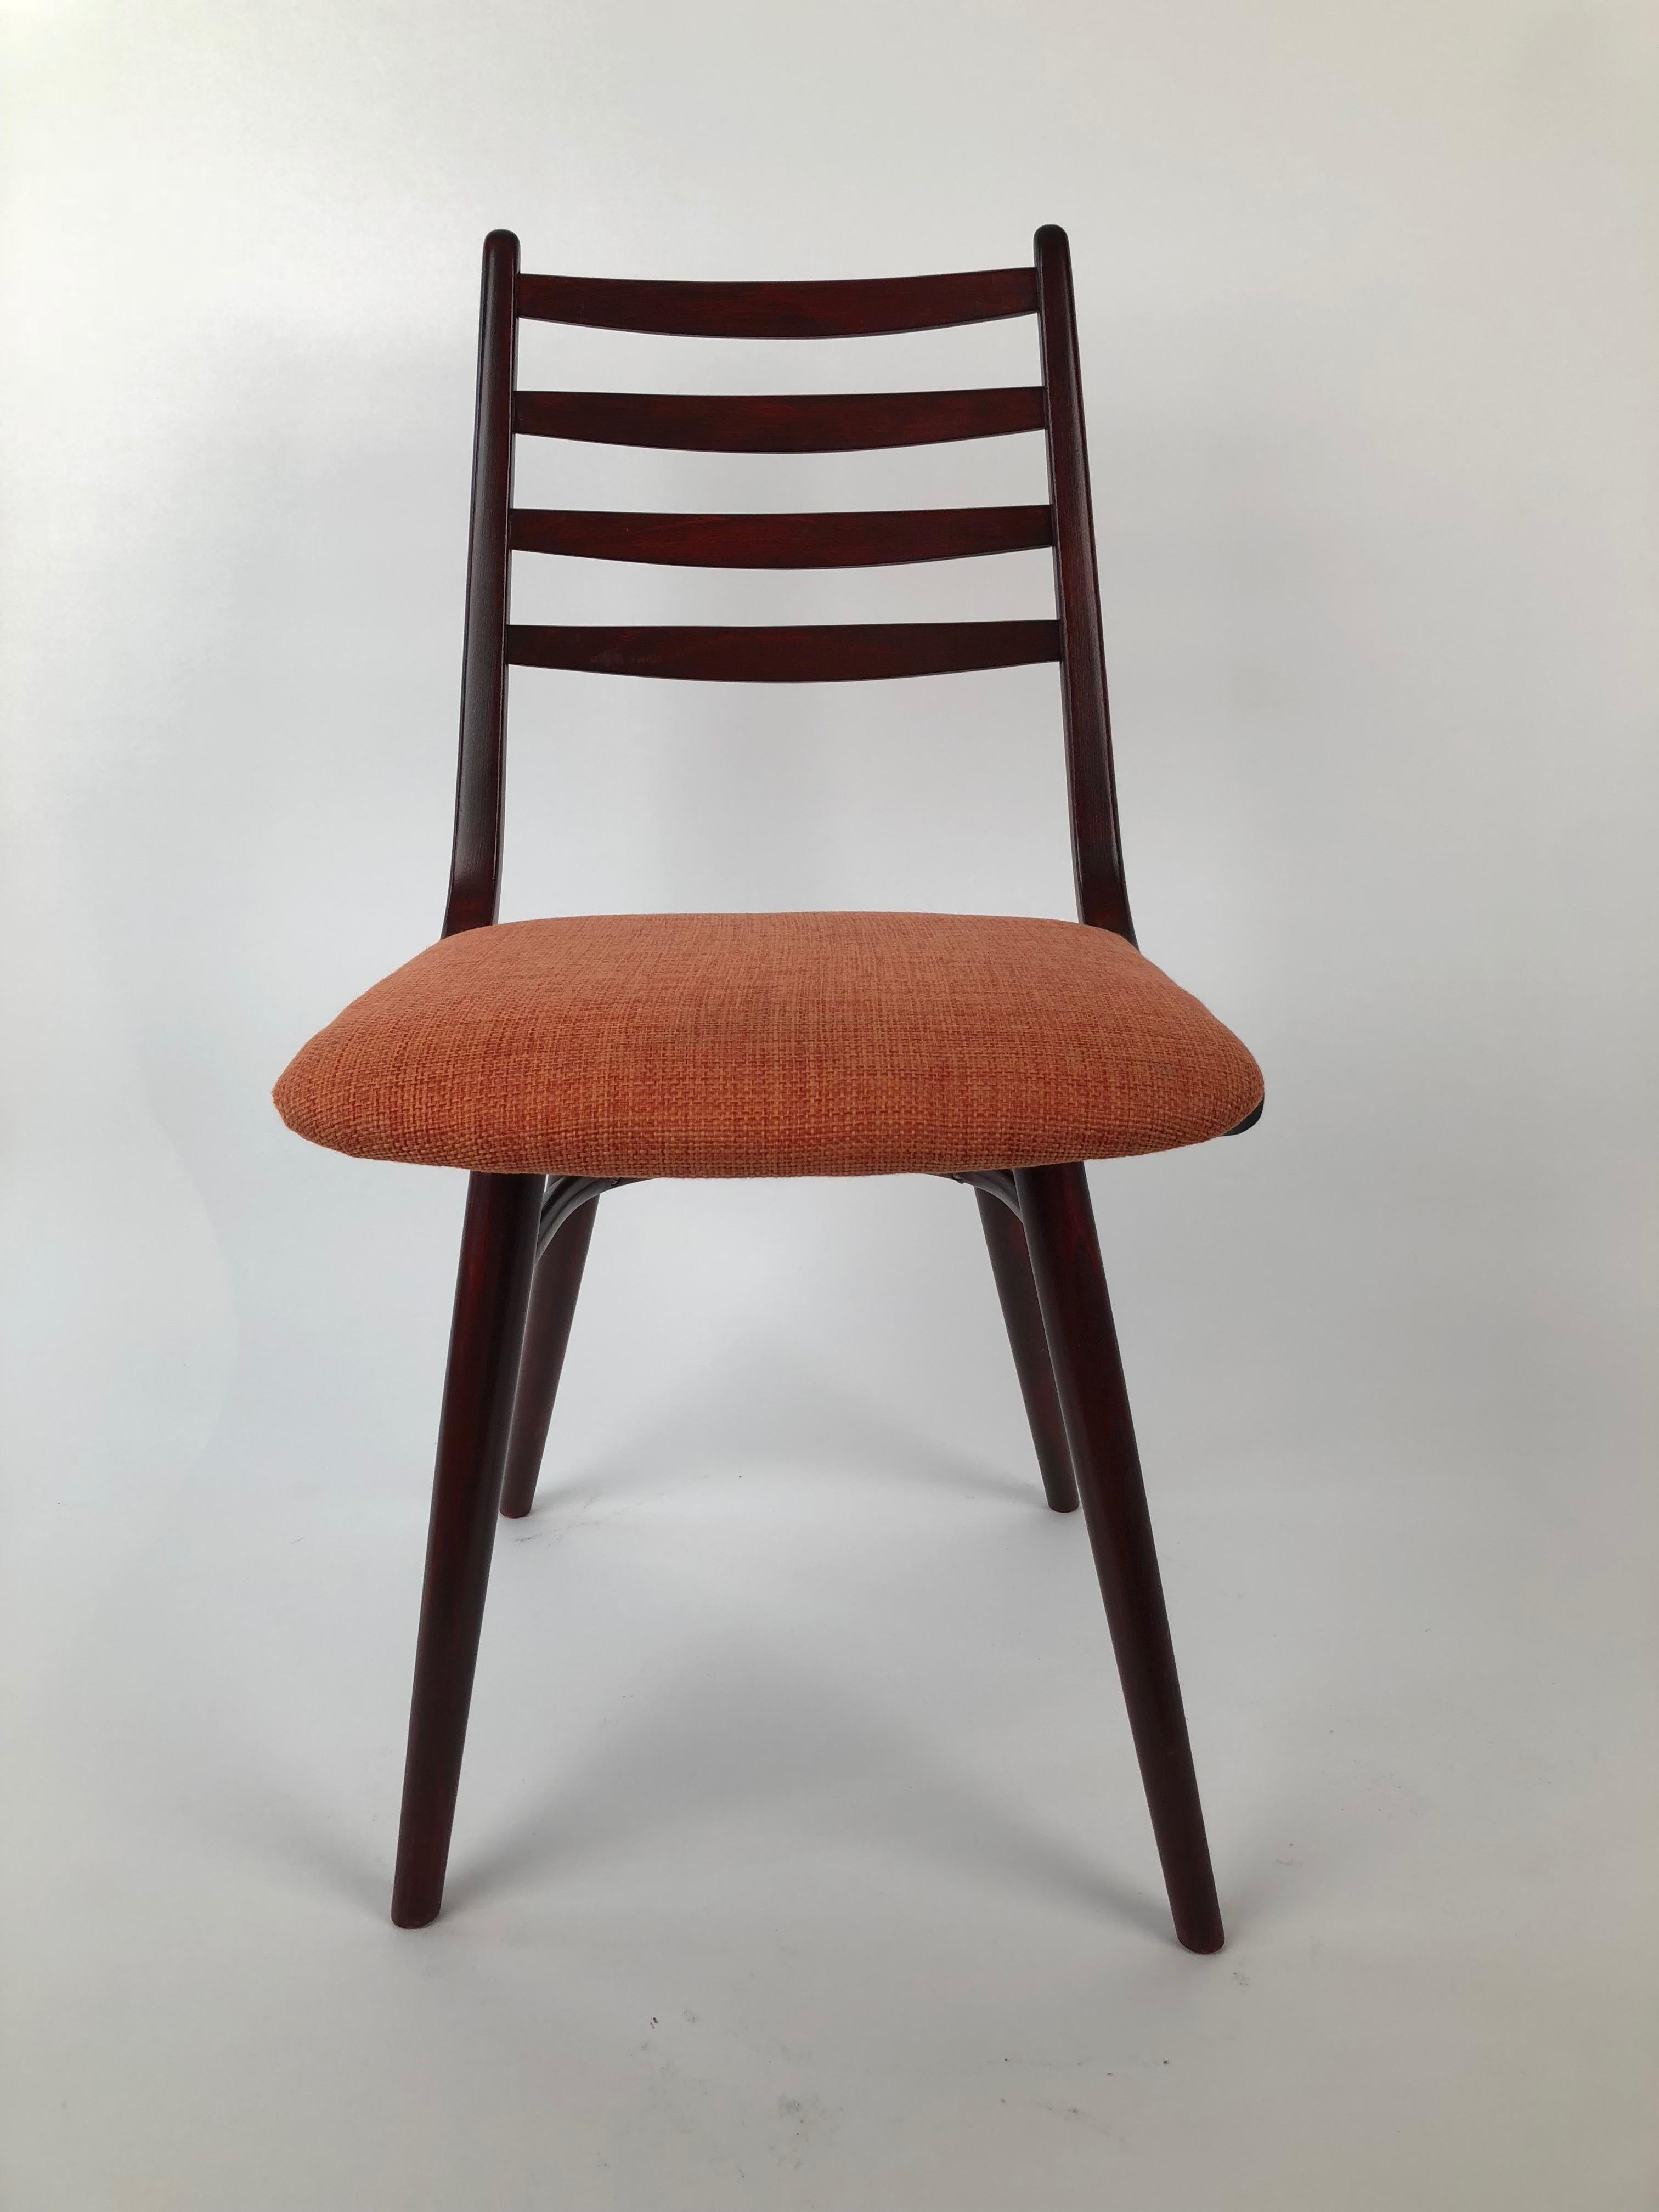 Modern Set of 4 Dinning Chairs, 1970's, Thonet Factory For Sale